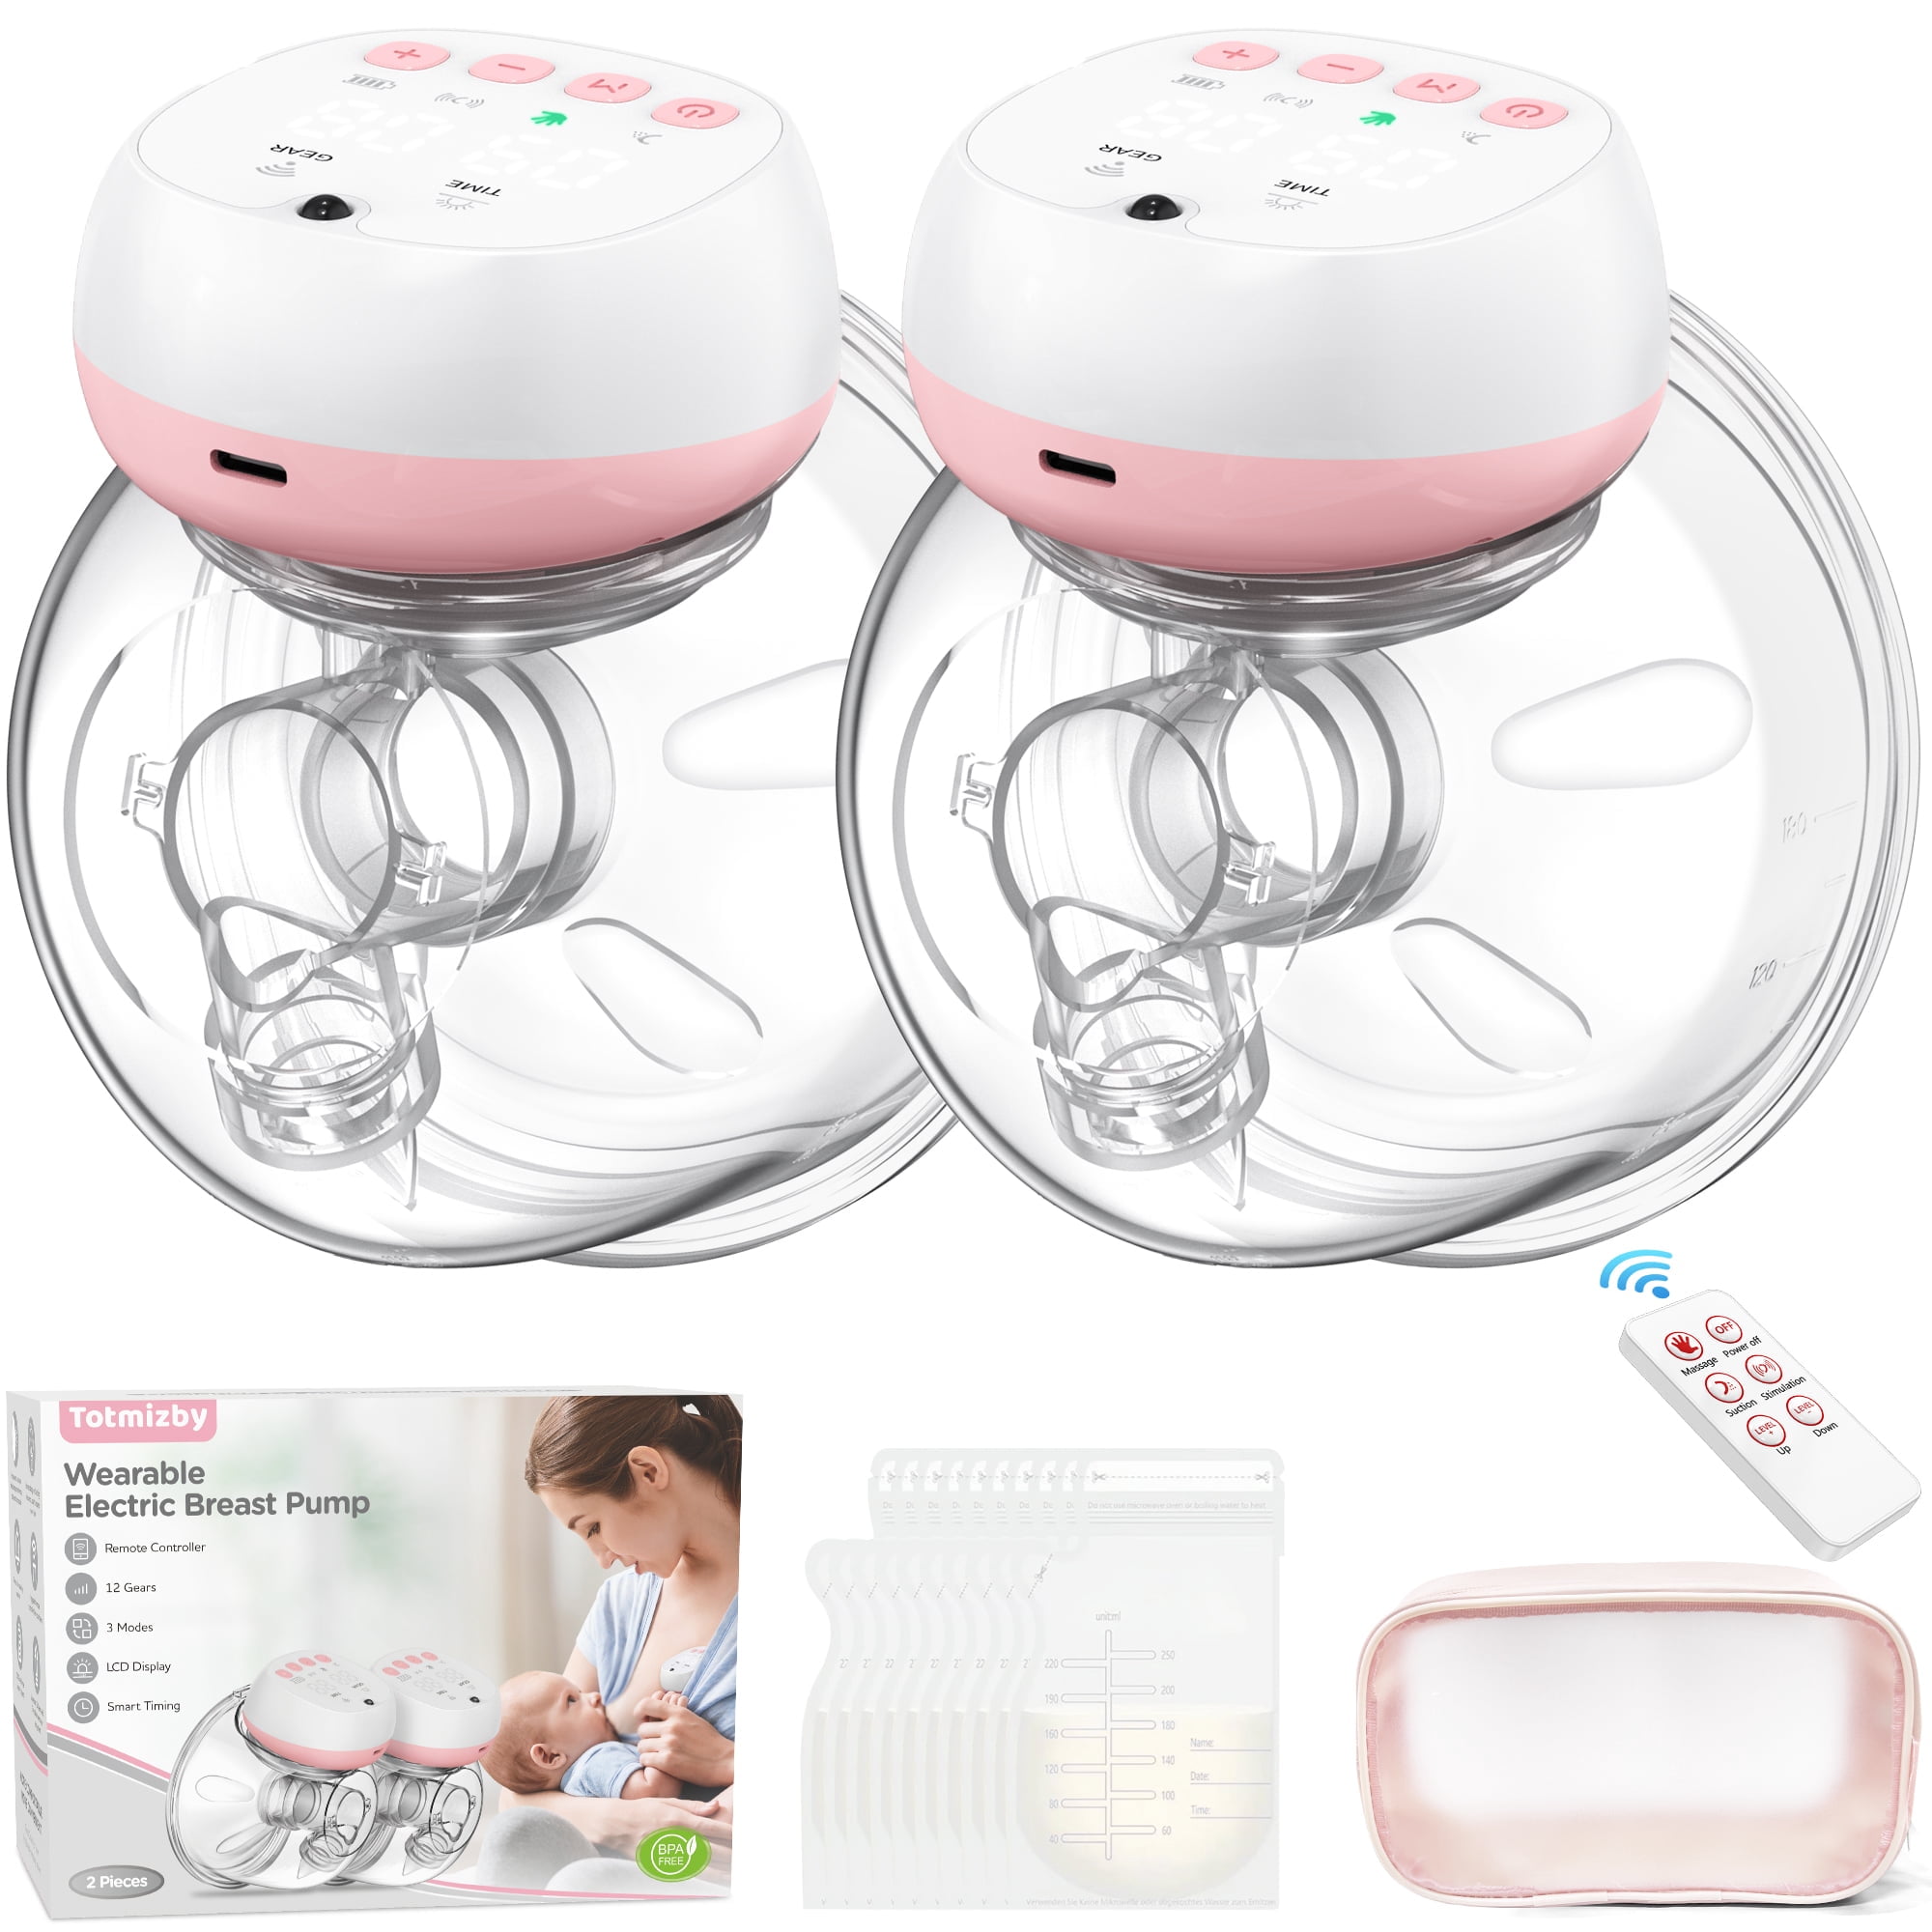 Totmizby Wearable Breast Pump, Double Hands-Free Remote Control Electric  Breast Pump with Comfortable Double-Sealed Flange, 3 Modes & 30 Levels 